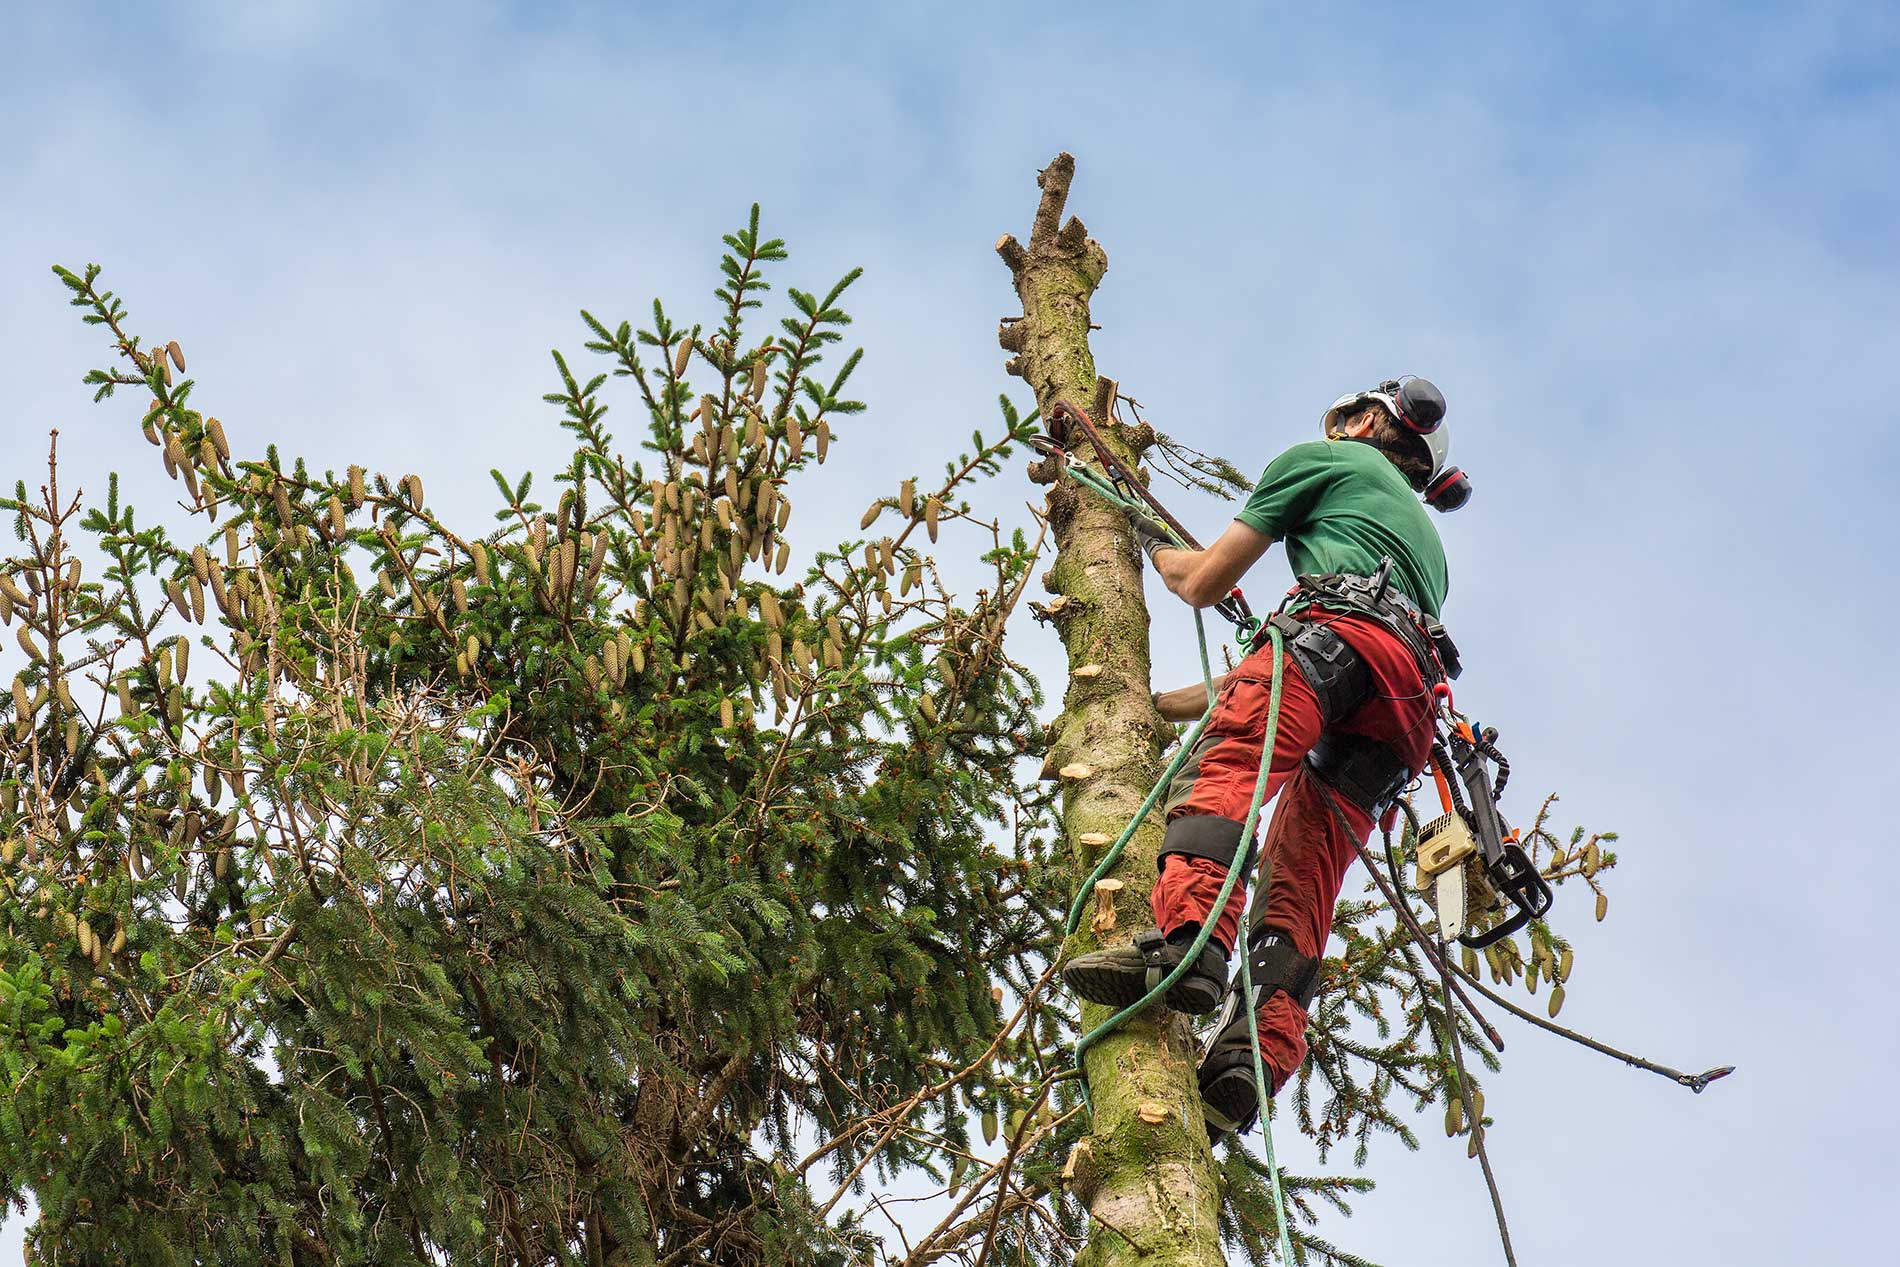 The Work of Certified Arborists climbing the tree